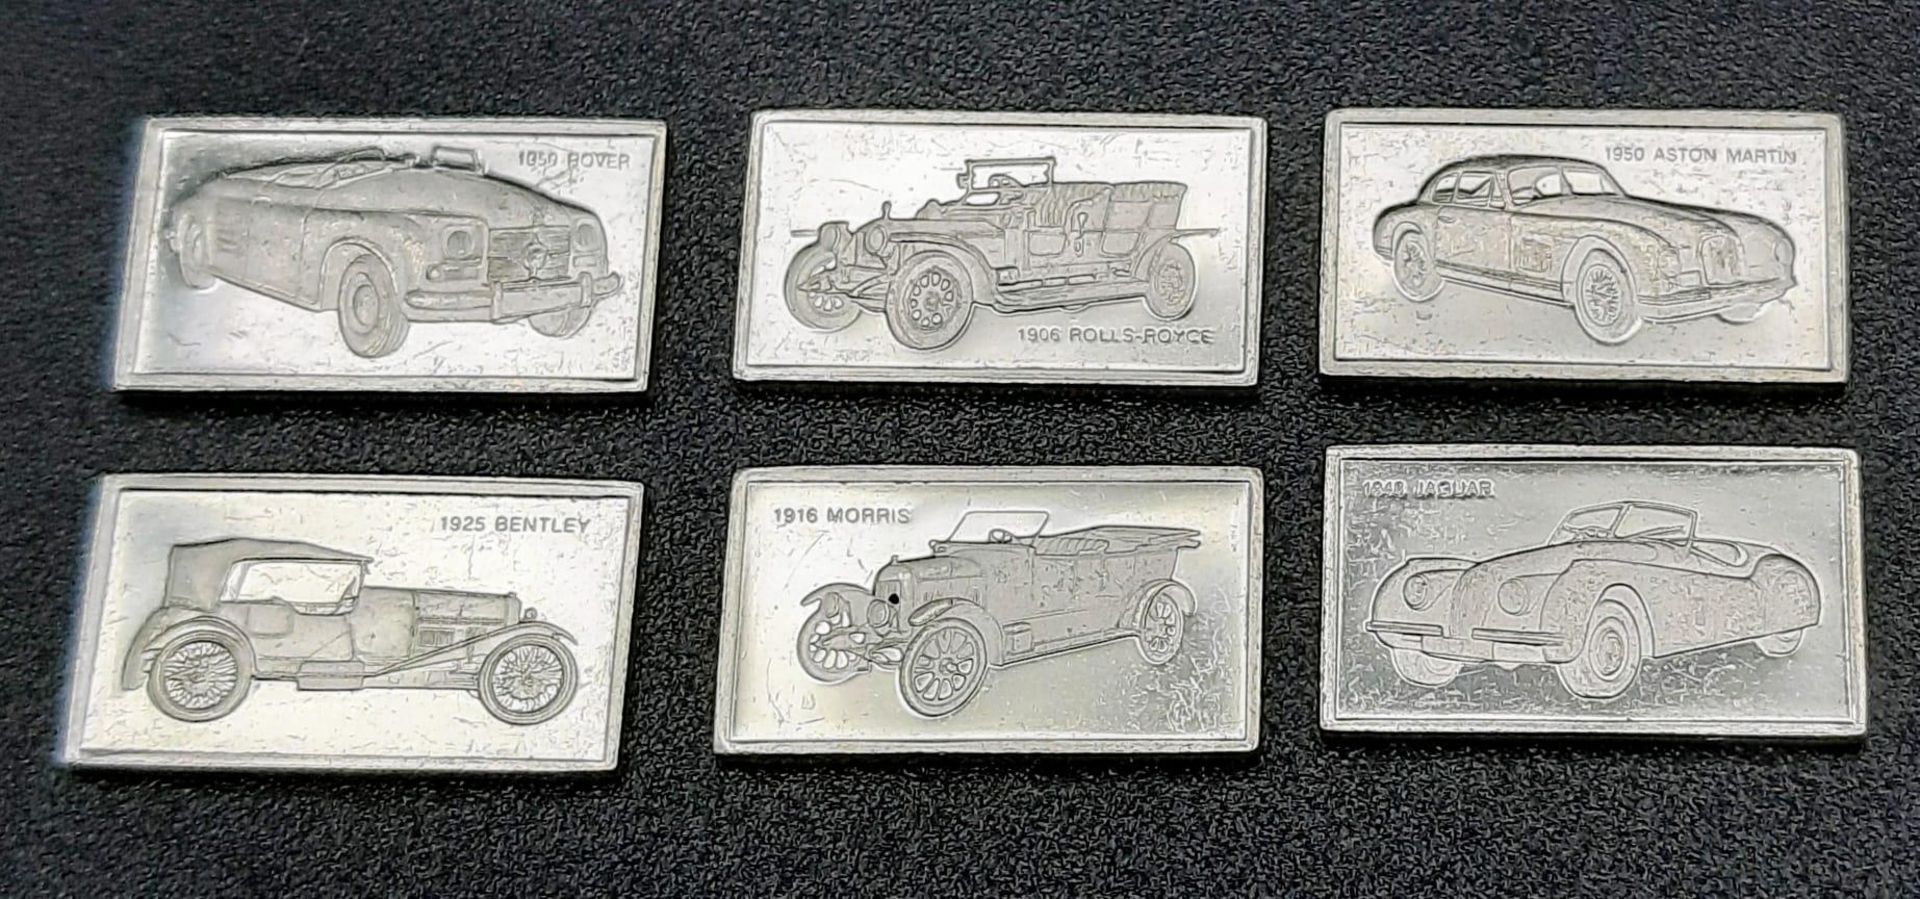 A SELECTION OF 6 BEST BRITISH CAR MANUFACTURERS MINI PLAQUES WITH LOGO AND CARS AND DATES. BRANDS TO